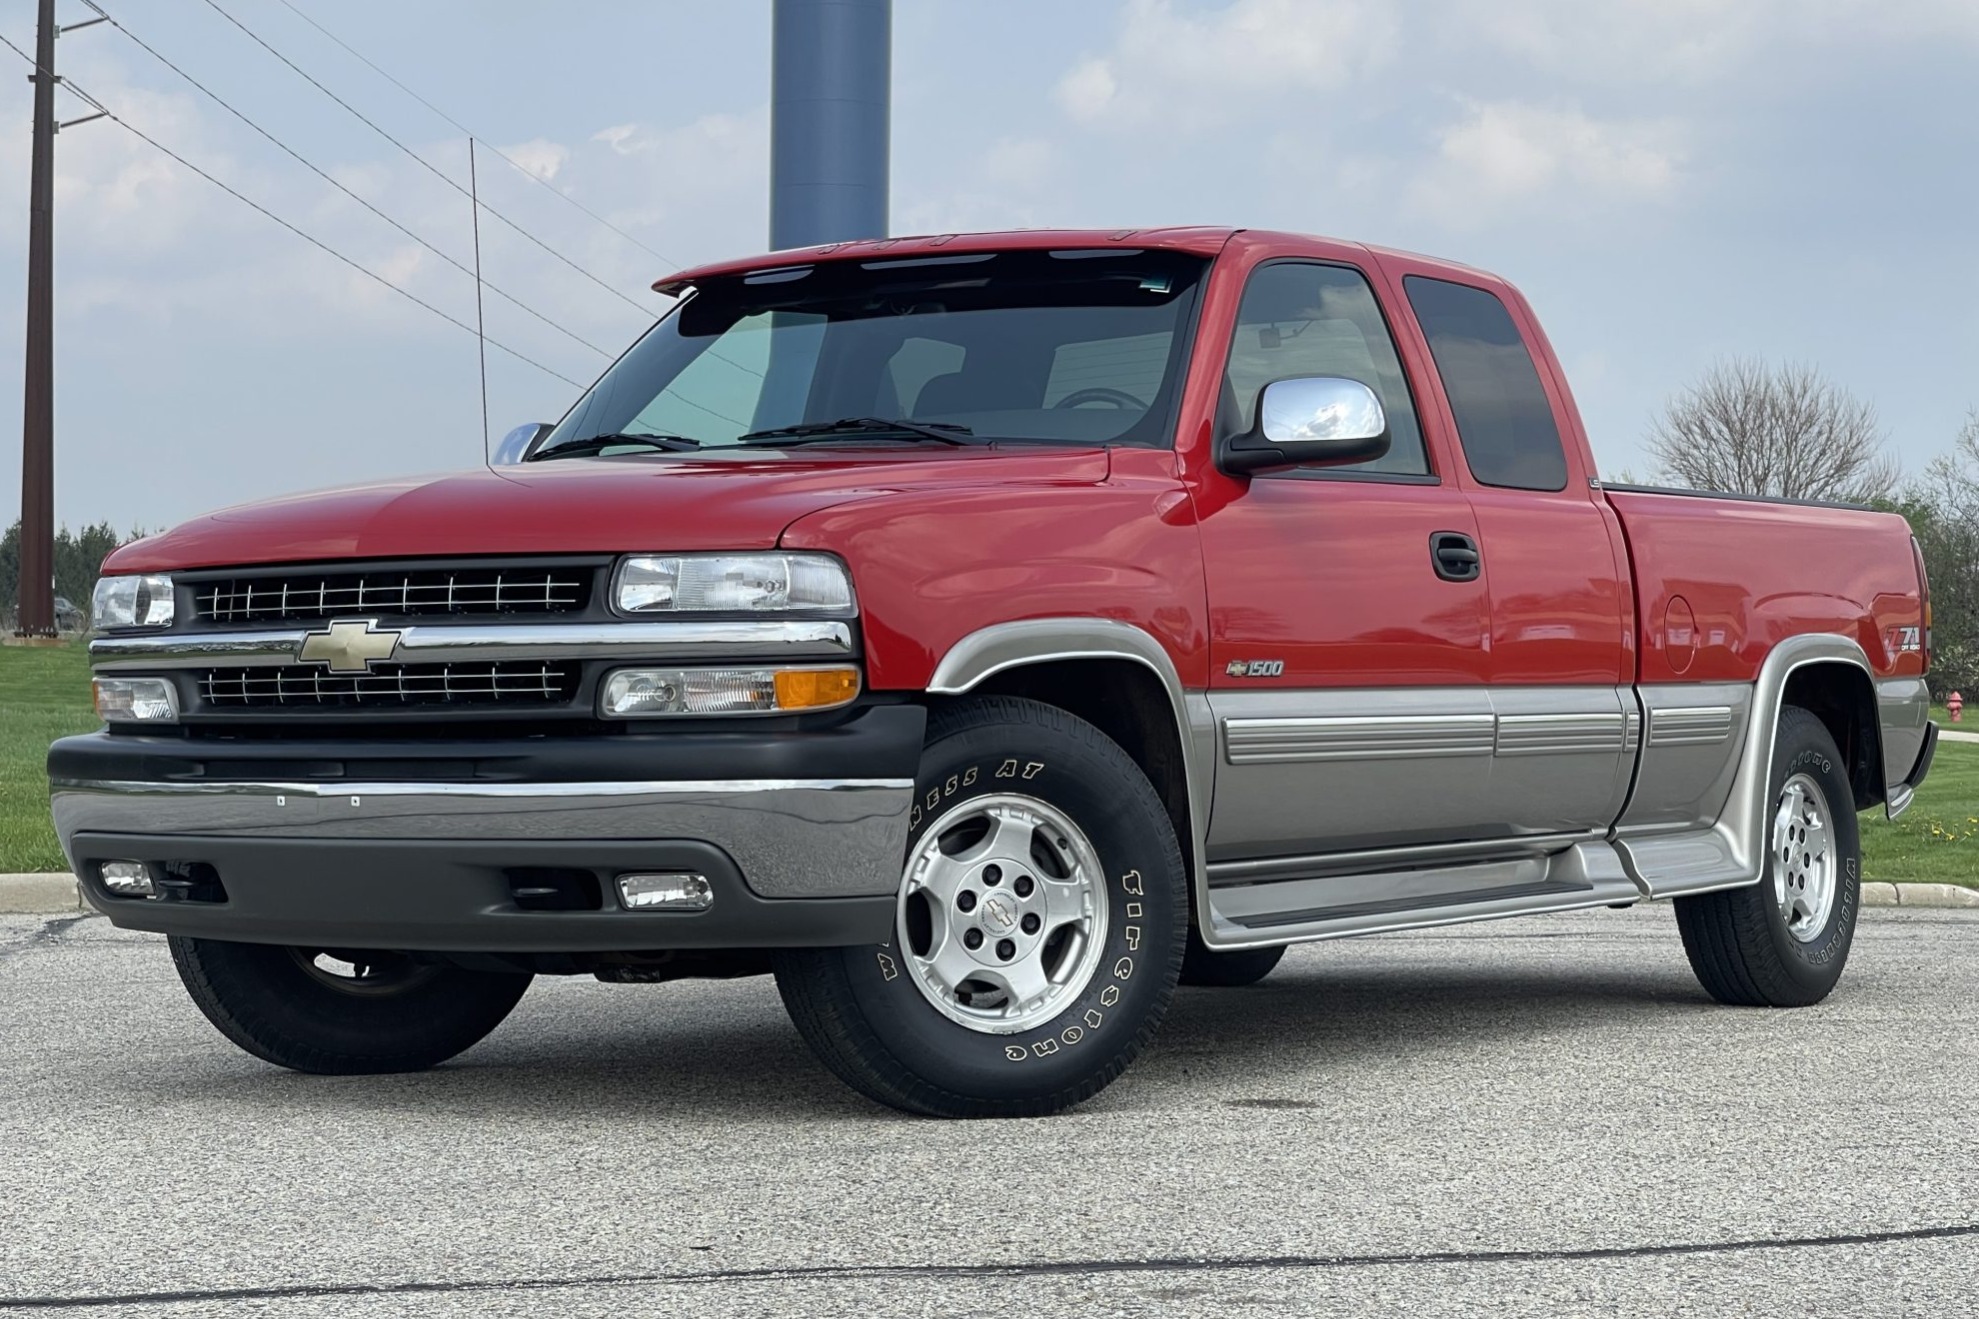 25k-Mile 2002 Chevrolet Silverado 1500 Z71 4x4 for sale on BaT Auctions -  closed on June 8, 2022 (Lot #75,591) | Bring a Trailer